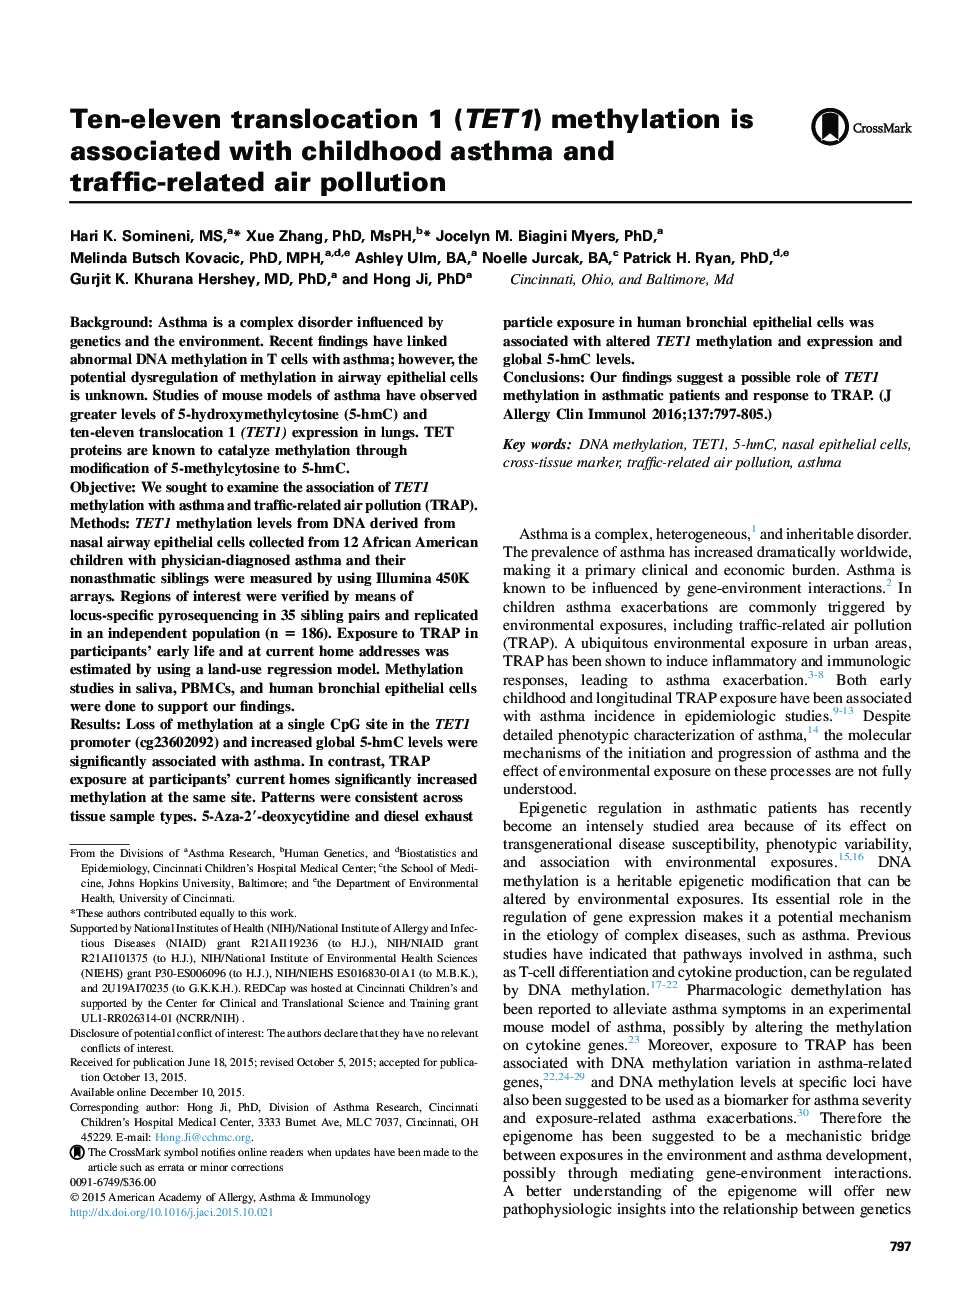 Asthma and lower airway diseaseTen-eleven translocation 1 (TET1) methylation is associated with childhood asthma and traffic-related air pollution